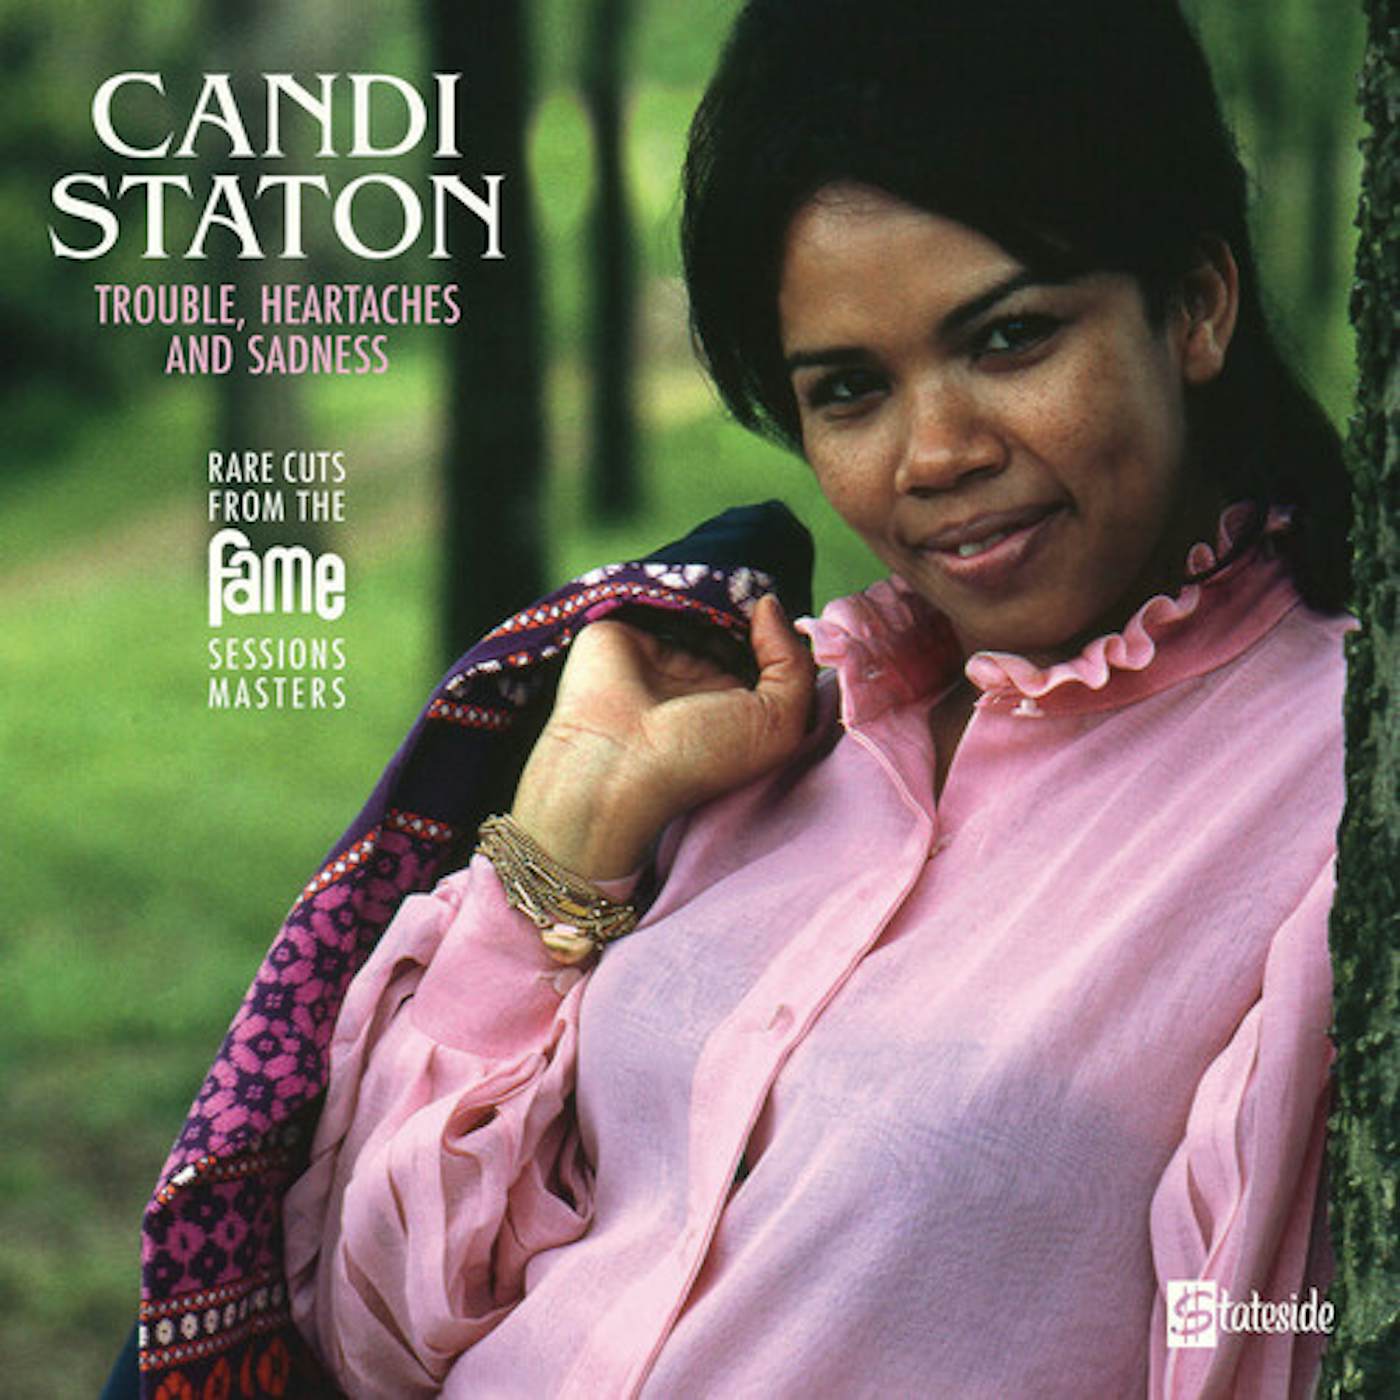 Candi Staton TROUBLE HEARTACHES AND SADNESS (THE LOST FAME) Vinyl Record